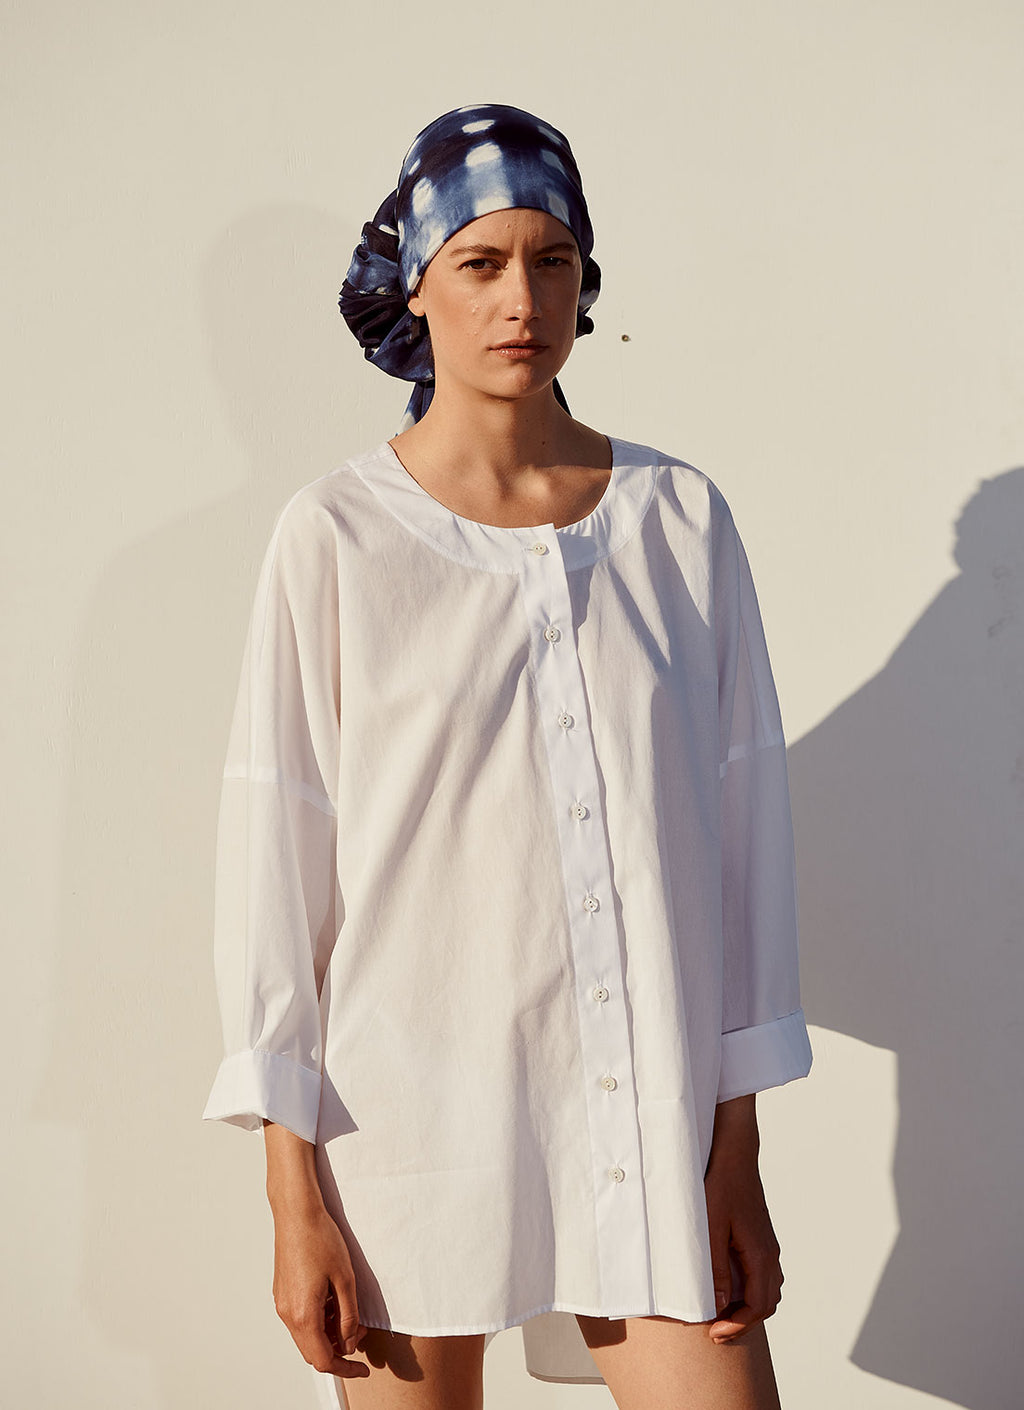 An easy fit, round neck, button-up, white cotton blouse with ¾, loose sleeves, has longer length and twist detail at the back